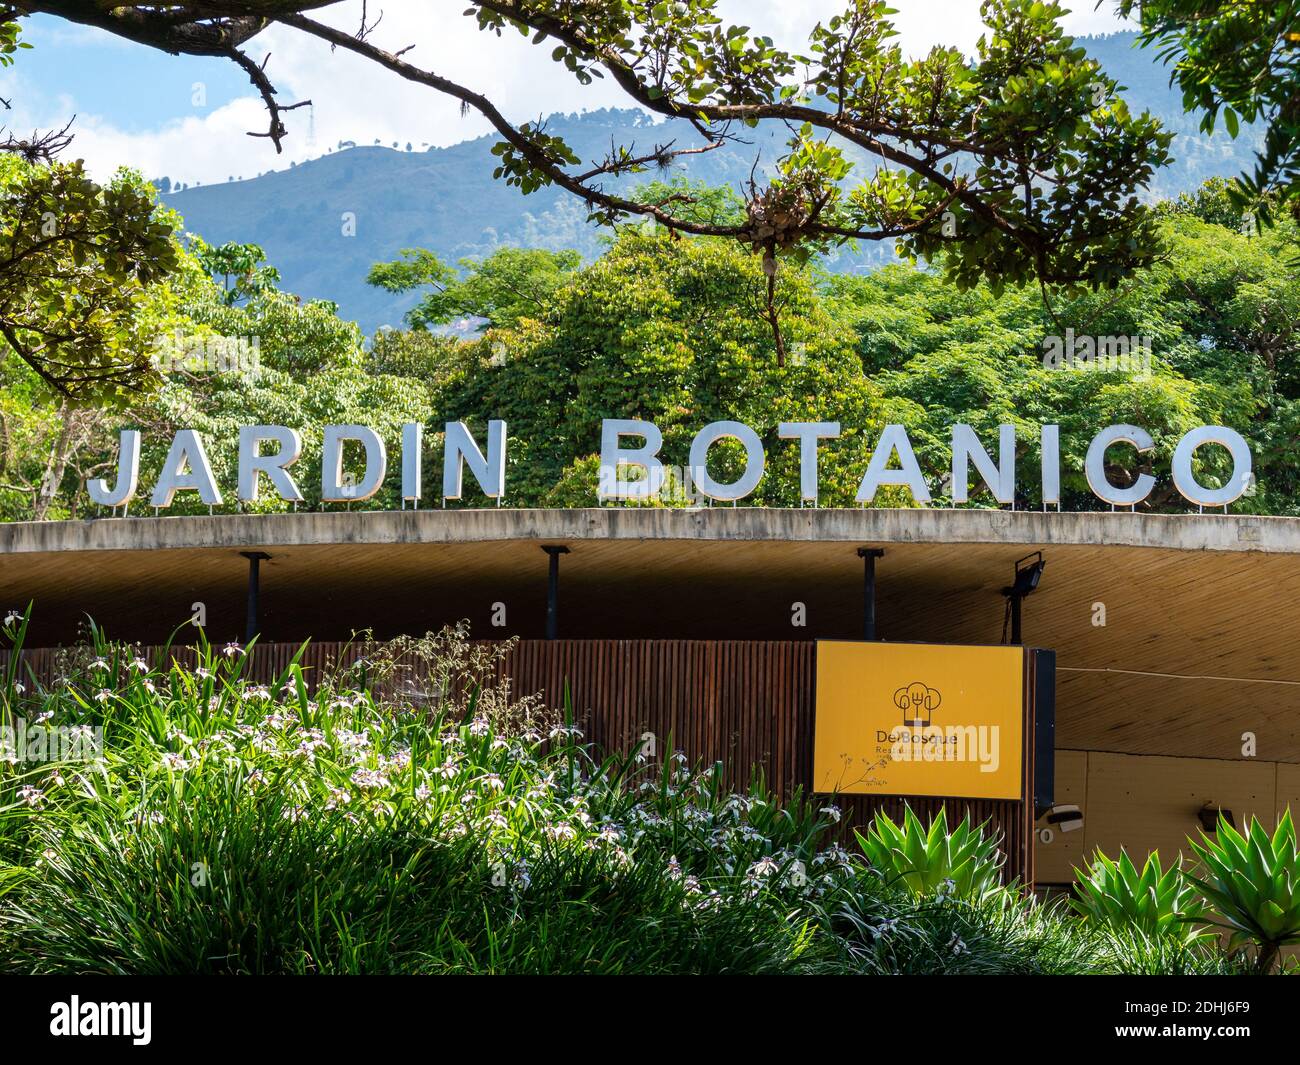 MEDELLIN, COLOMBIA - Dec 03, 2020: Medellin, Antioquia, Colombia - December 2 2020: Sign of the City's Botanical Garden Surrounded by Trees and Plants Stock Photo